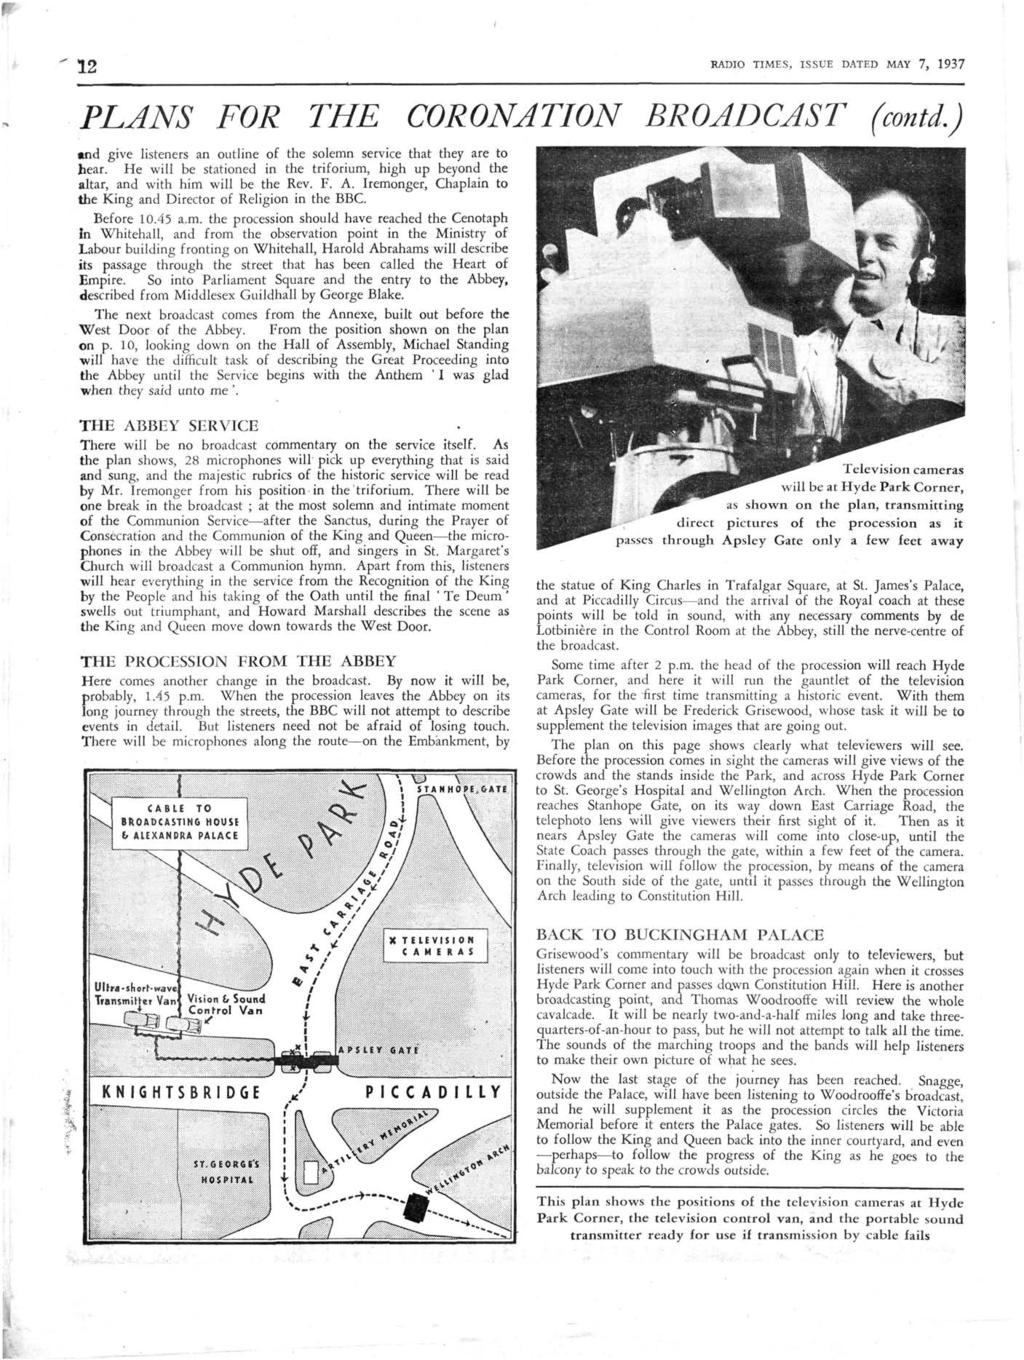 12 * RADIO TIMES, ISSUE DATED MAY 7, 1937 PLANS FOR THE CORONATION BROADCAST (contd.) nd give litener an outline of the olemn ervice that they are to hear.